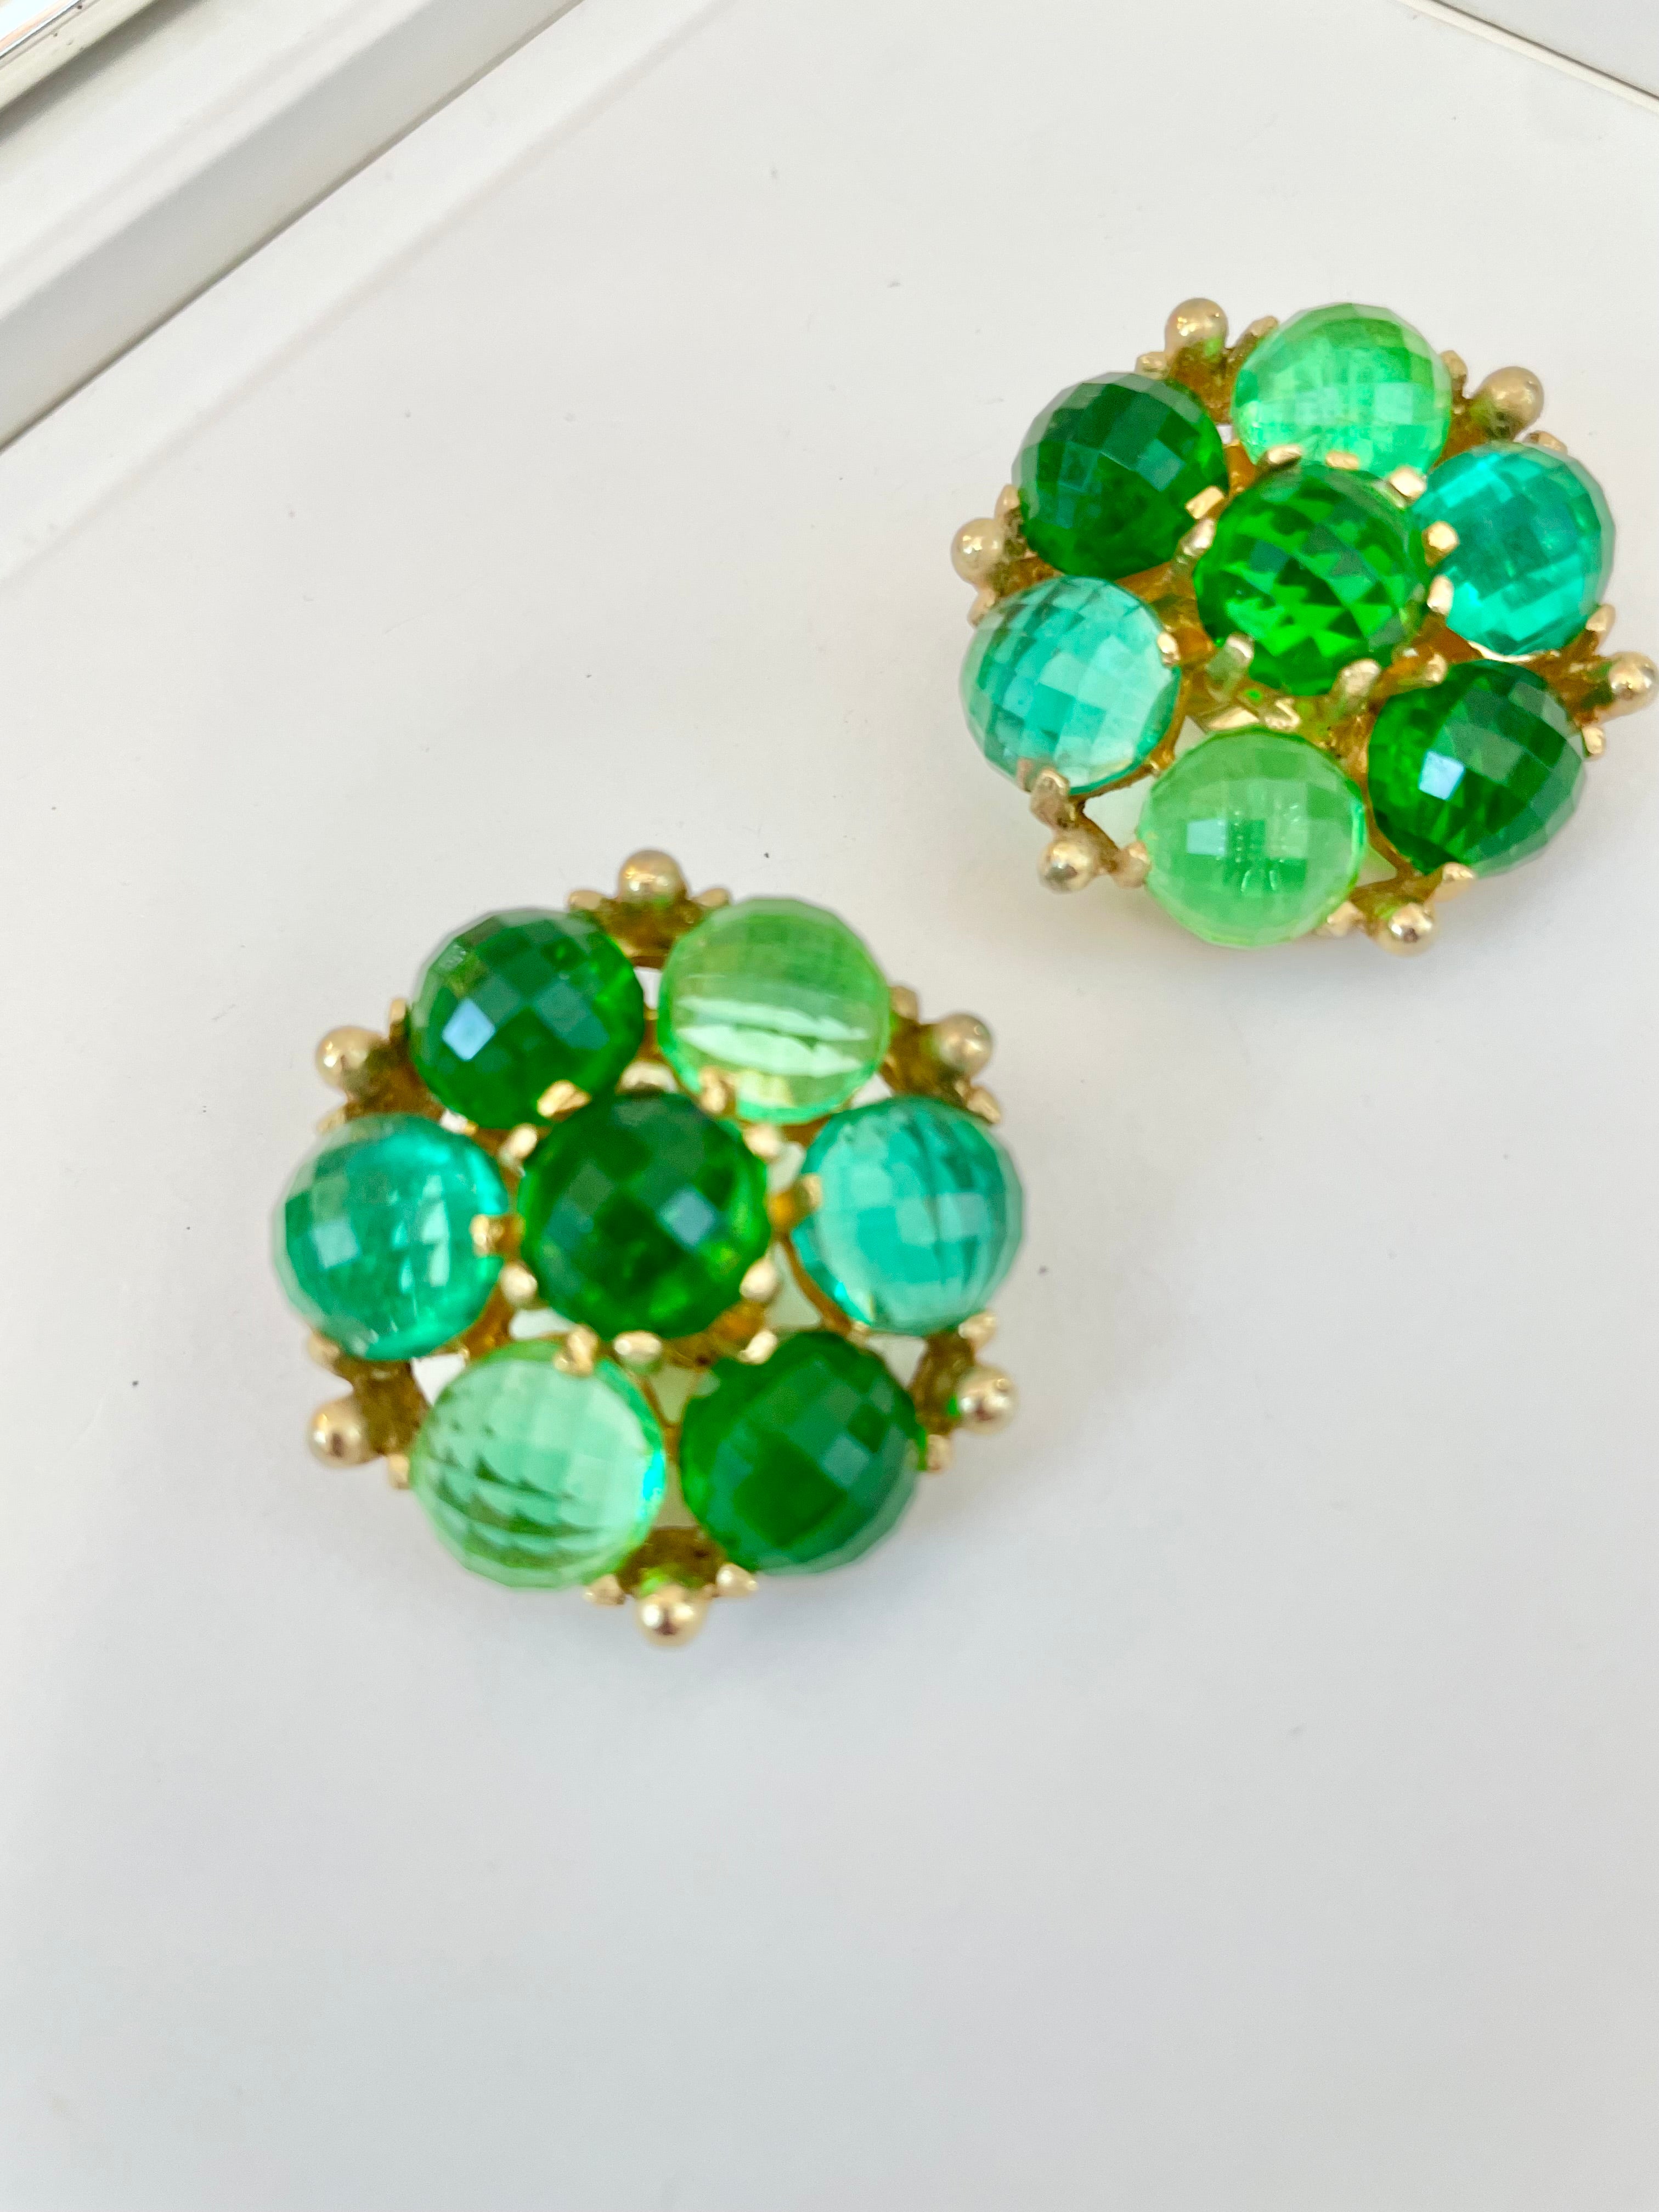 The most divine emerald cluster earrings.... so extraordinary!